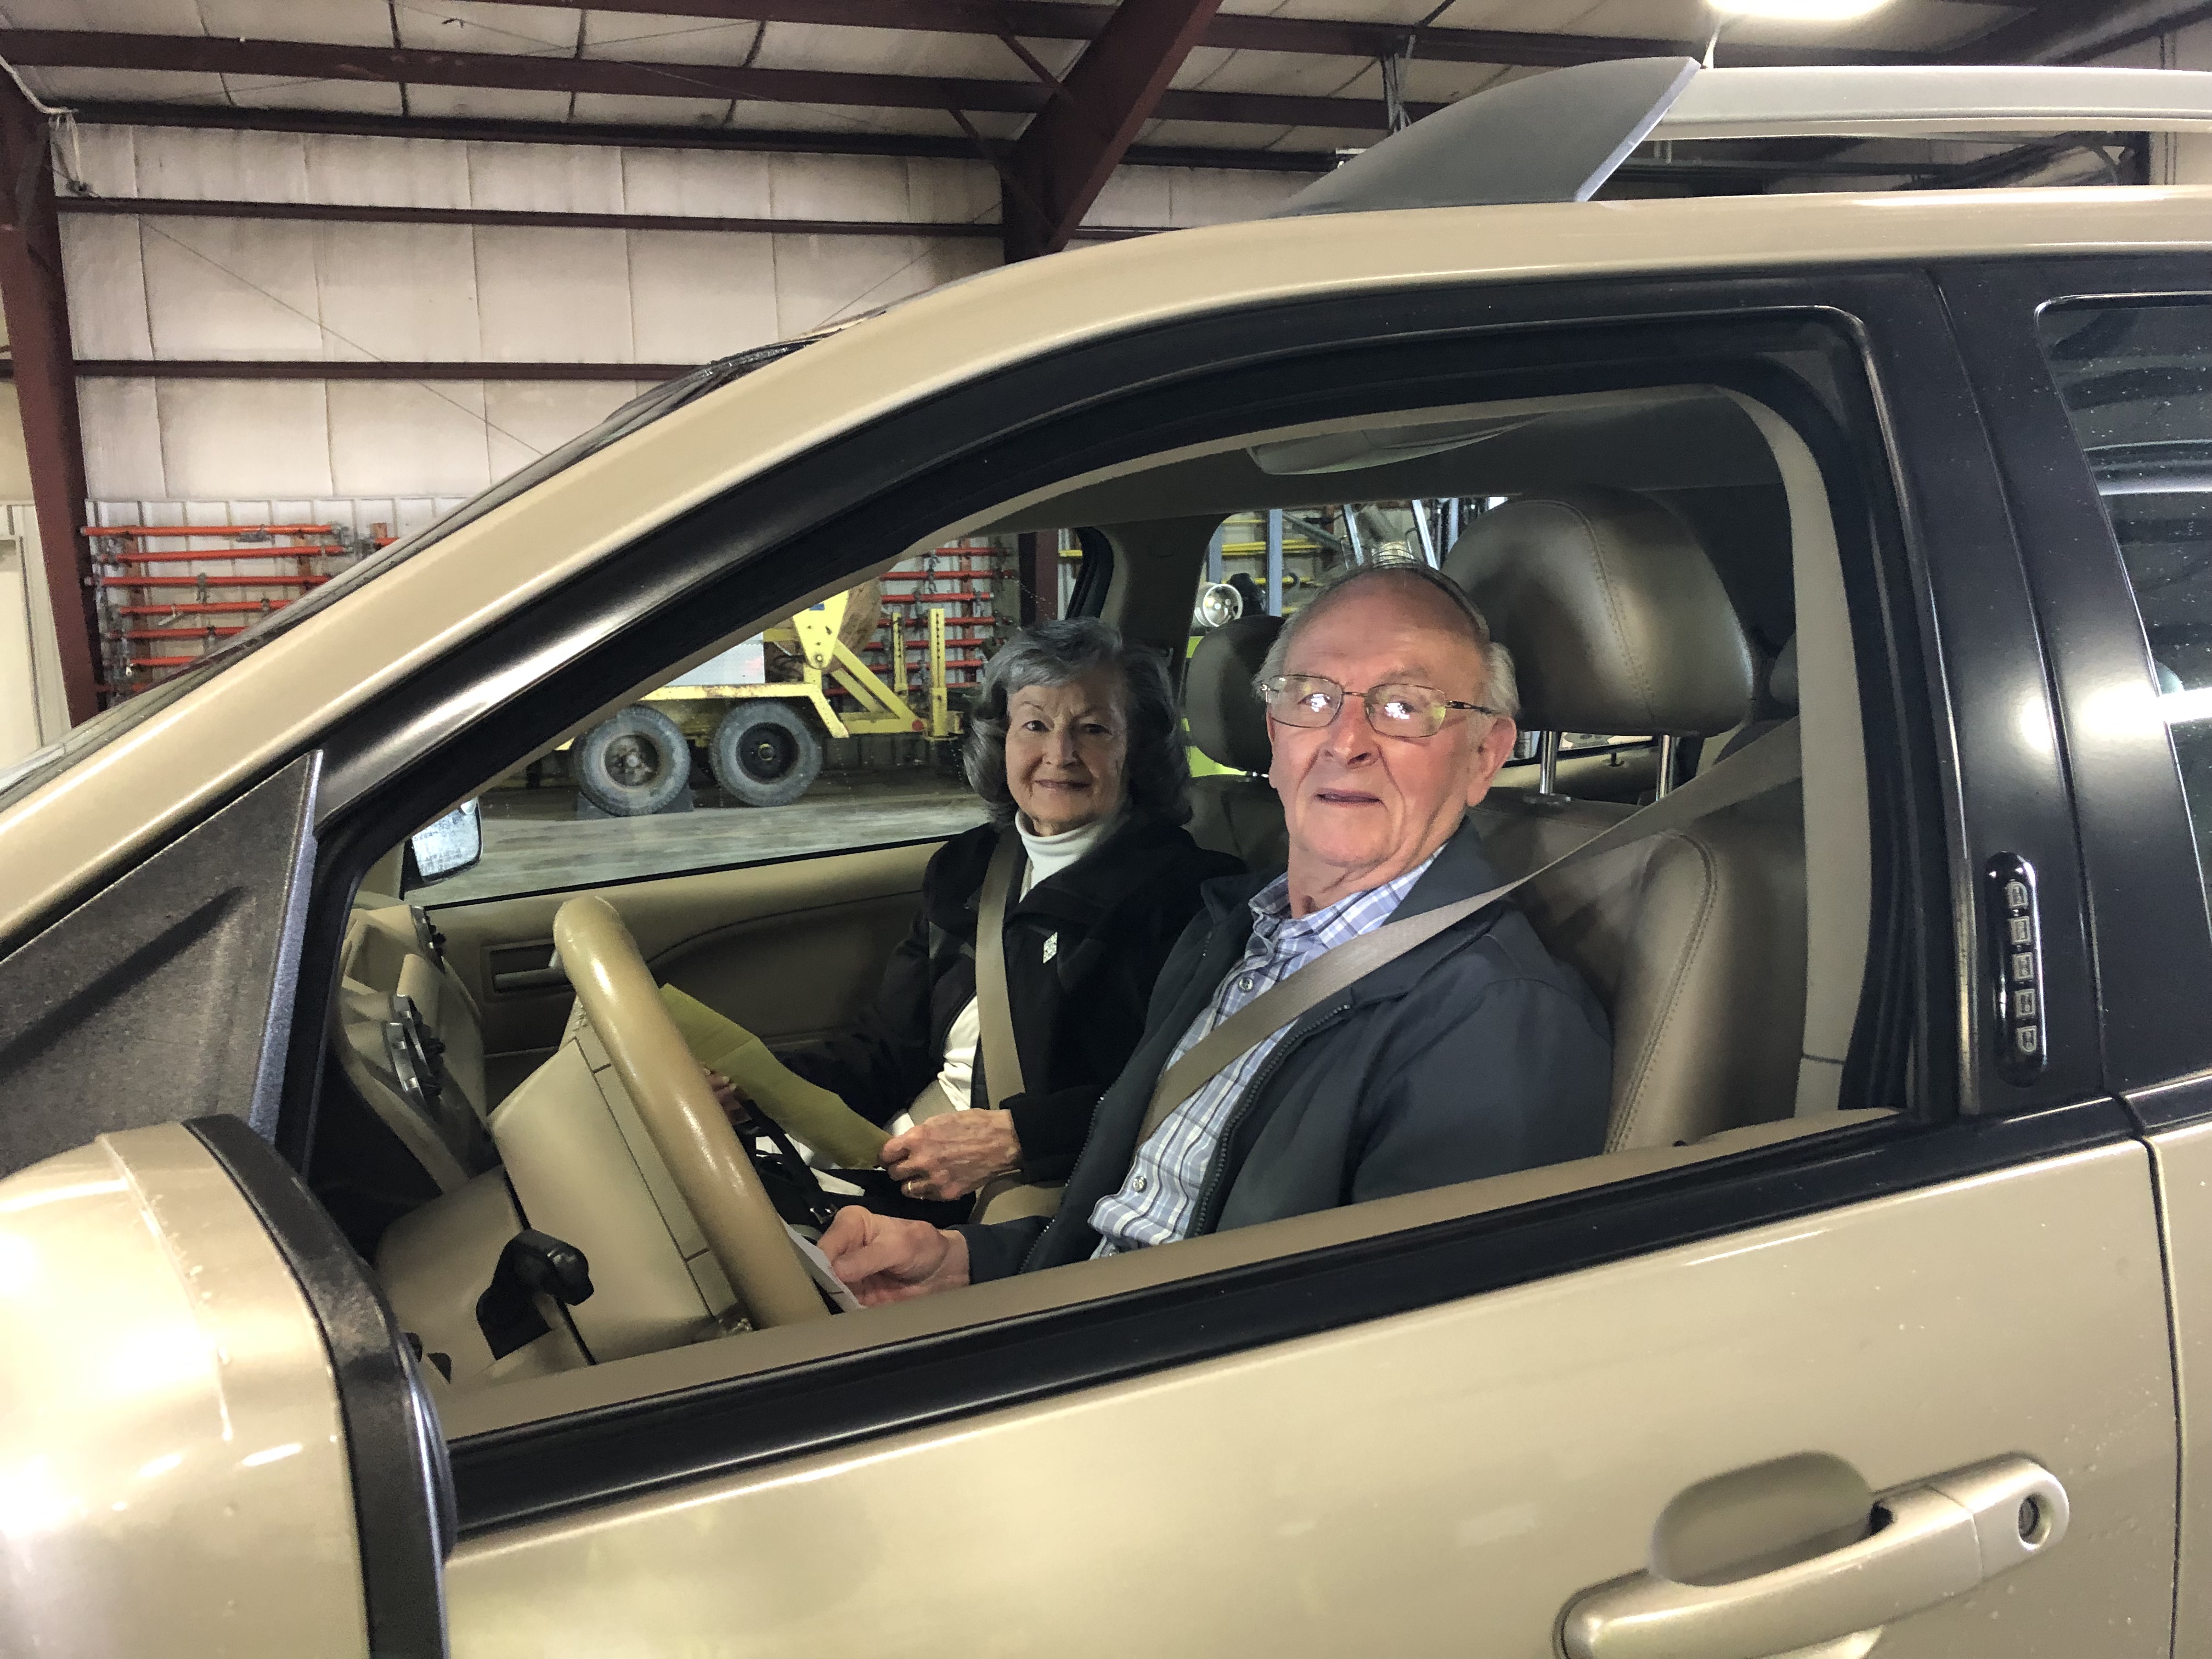 NWEC member-owners in their car at the drive-thru annual meeting 